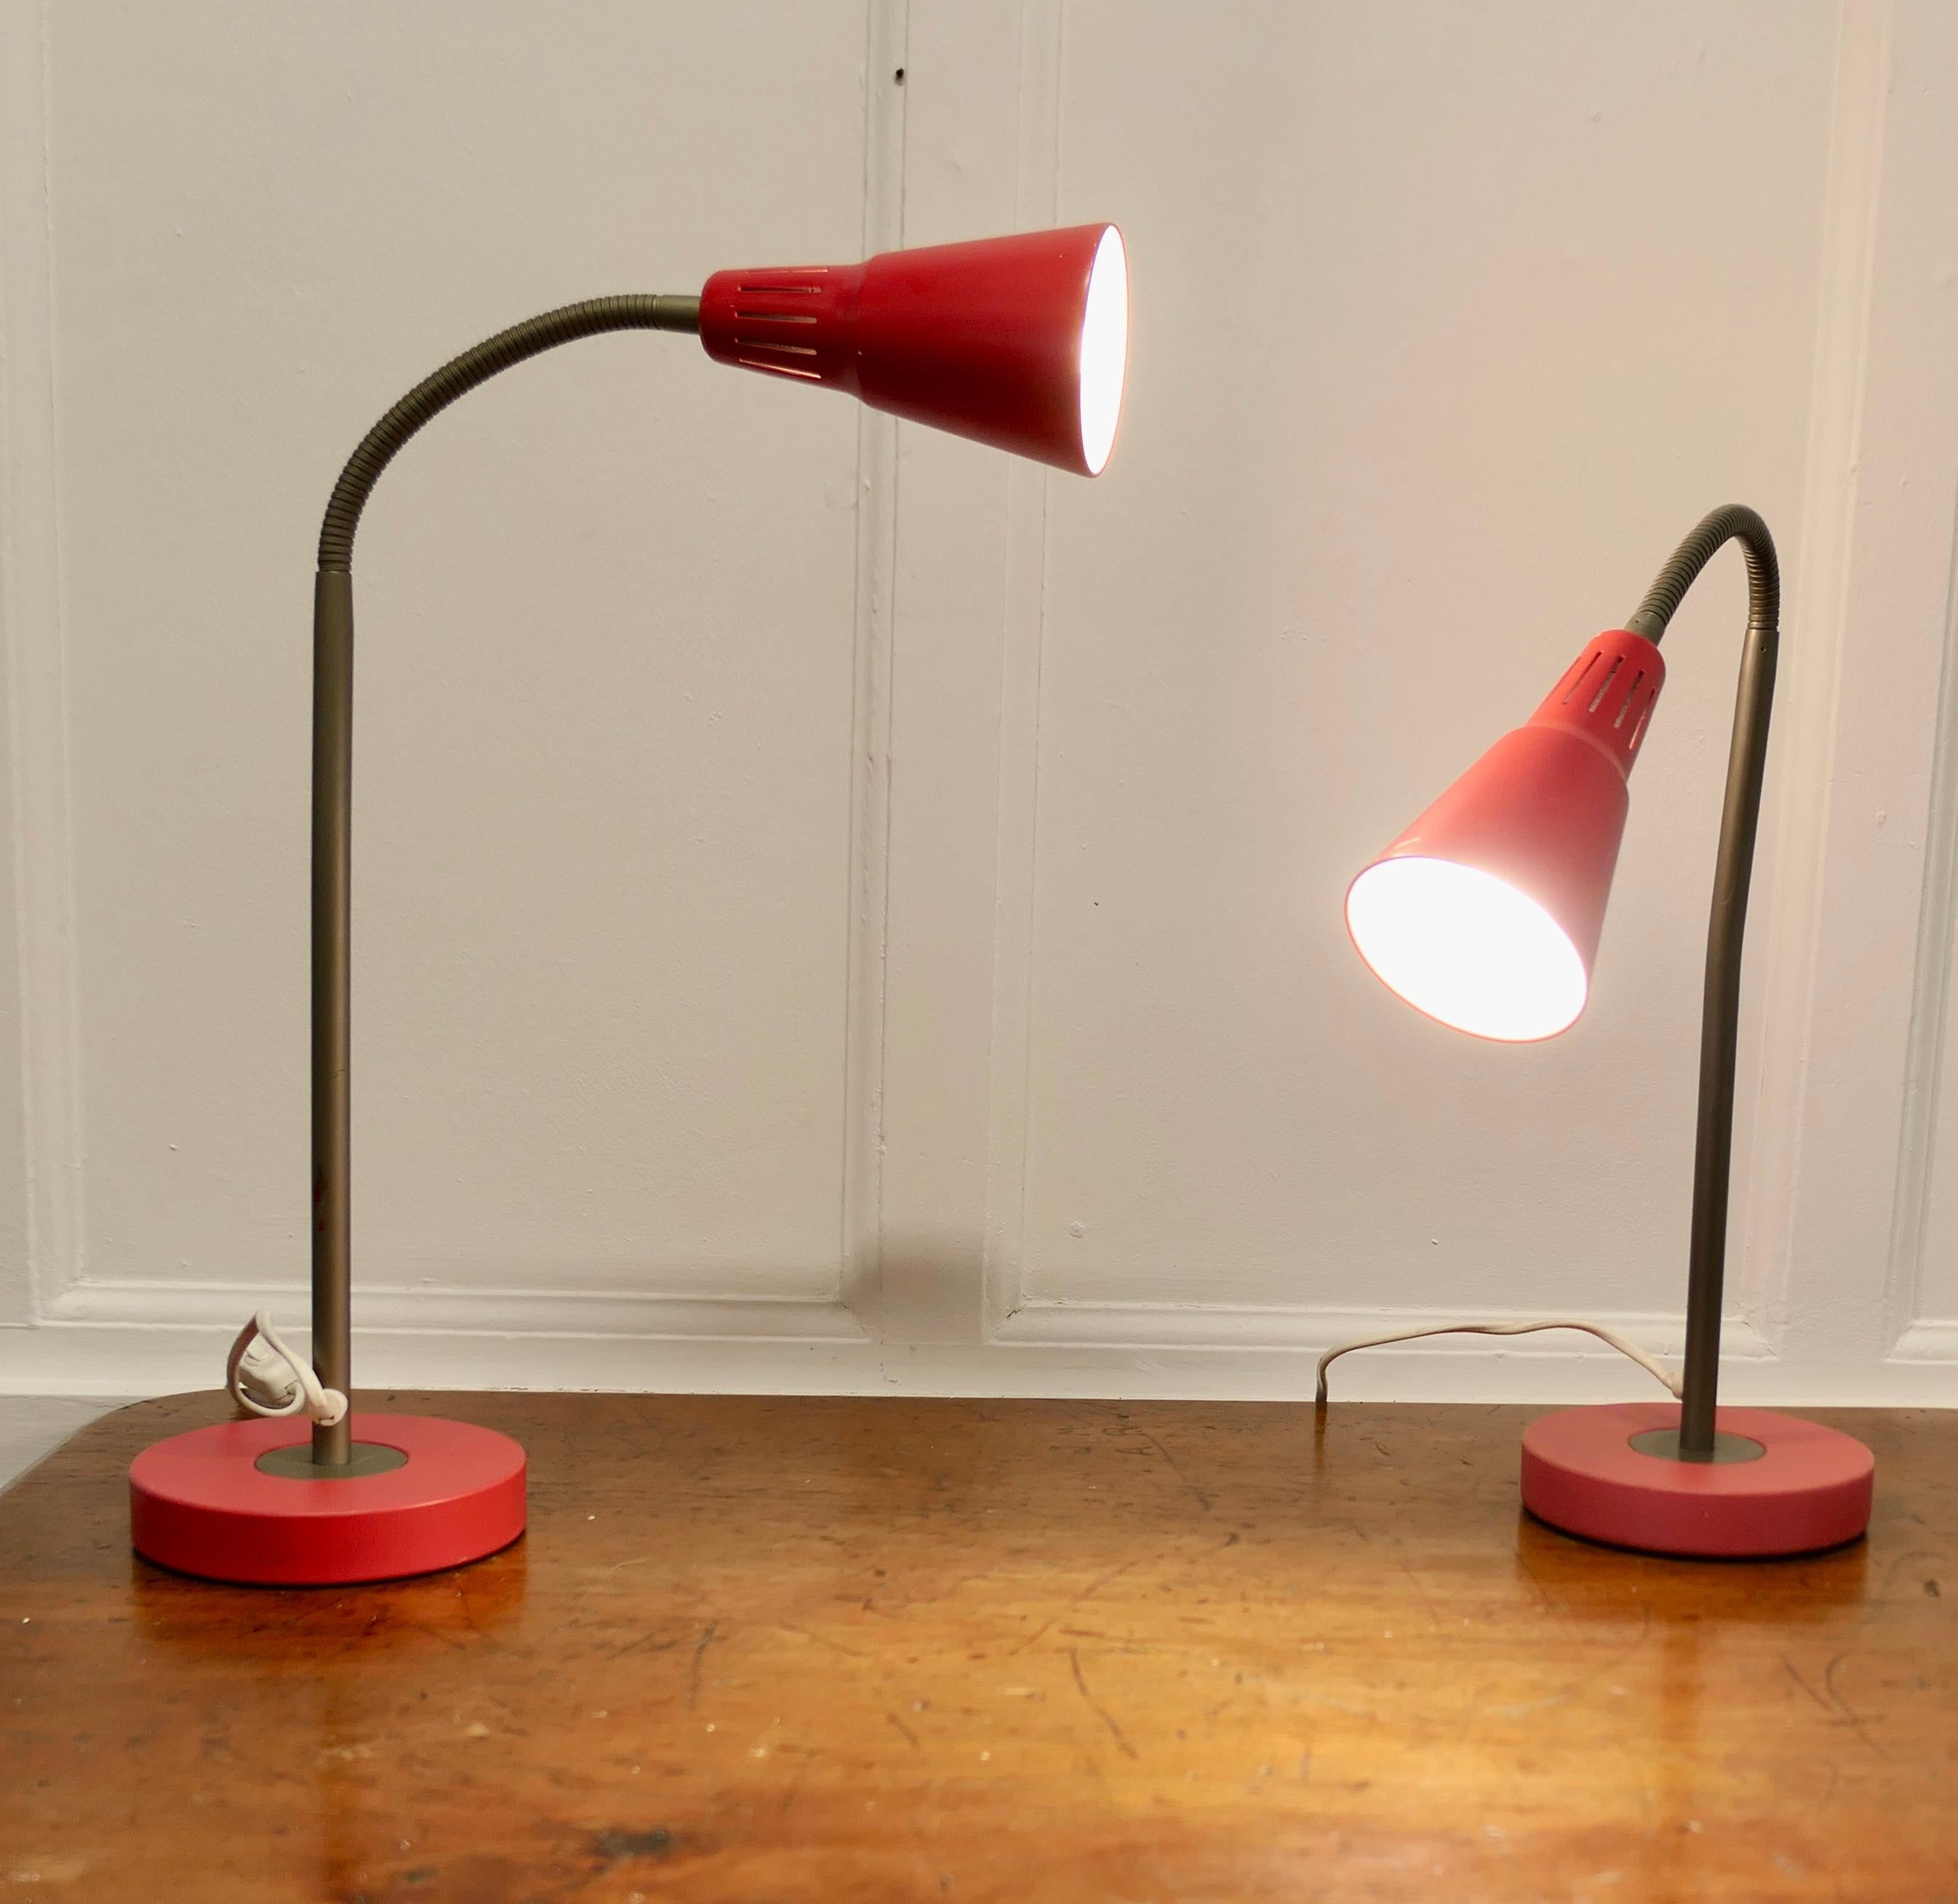 A Pair of Vintage Retro French Angle Desk Lamps

Very stylish statement pieces in red, with a conical shades set on bendy arms which can be angled a little to suit 
The lamps are 26” tall maximum and 6” in diameter
MS98.